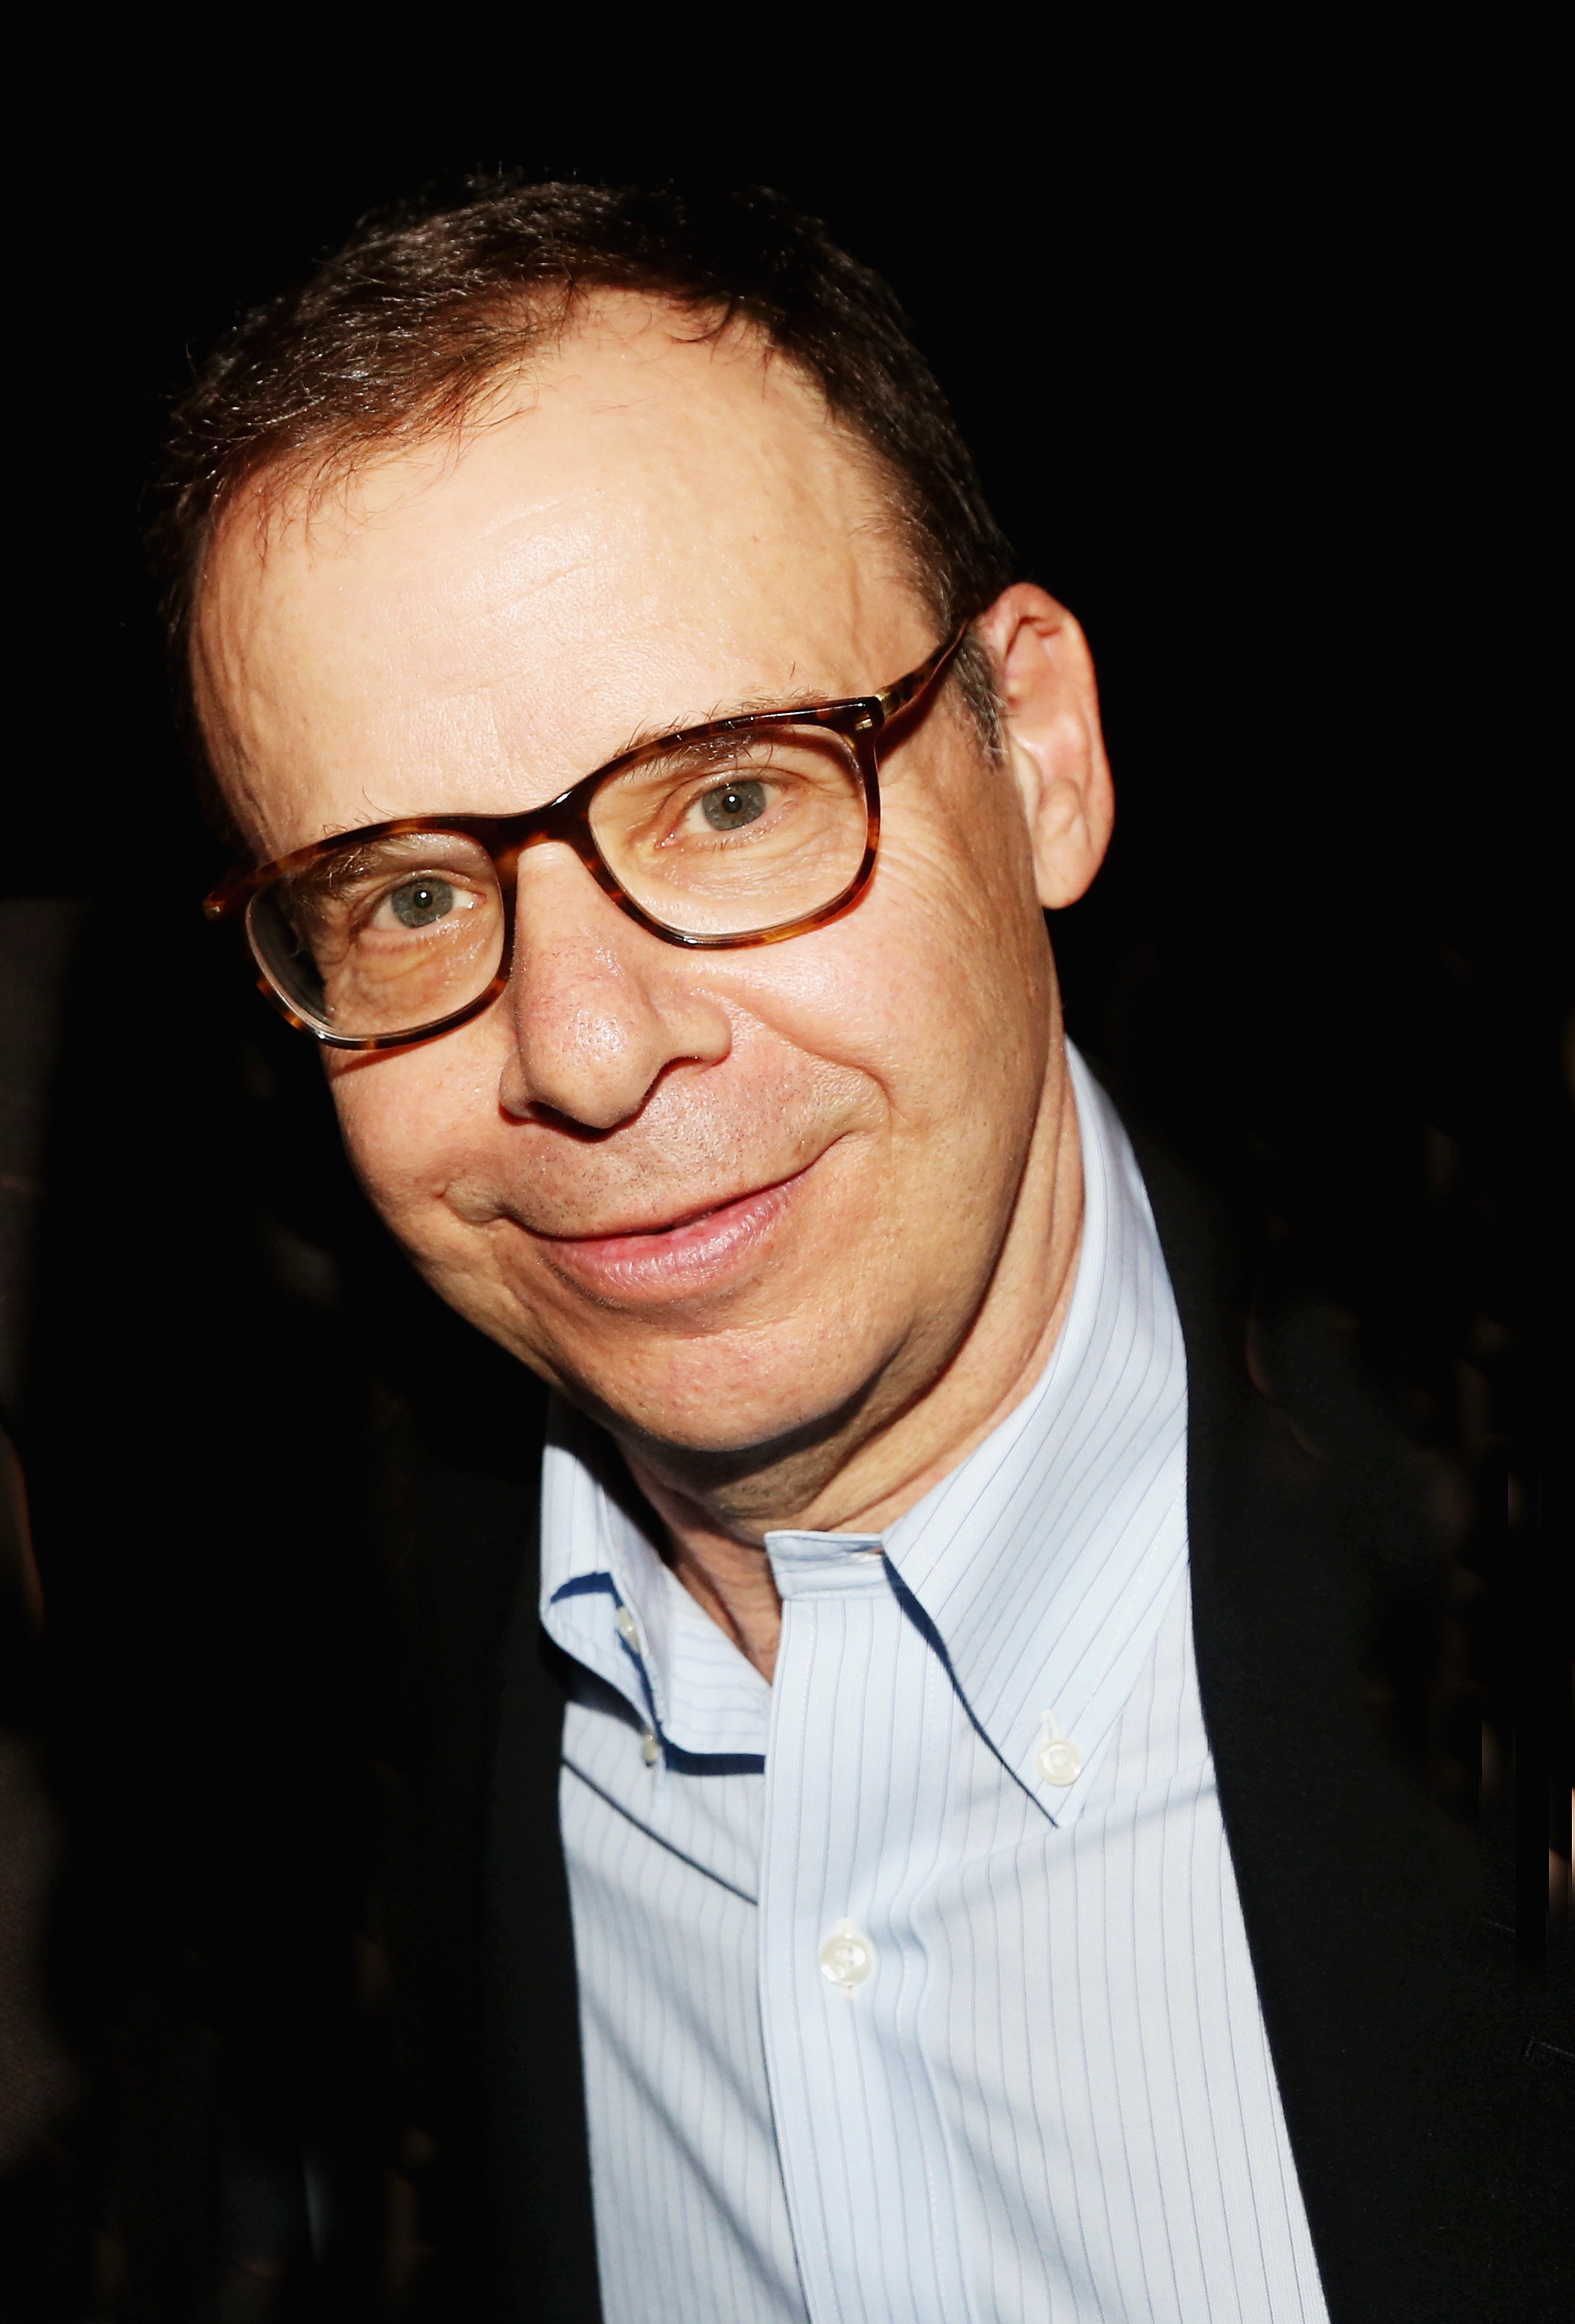 <p><span>Rick Moranis became a widower when his wife of about five years, makeup artist Ann Belsky, died of breast cancer on Feb. 4, 1991 -- one day before her 35th birthday. The "Honey, I Shrunk the Kids" and "Ghostbusters" actor subsequently took a 24-year hiatus from Hollywood after her death to focus on raising their twins.</span></p>